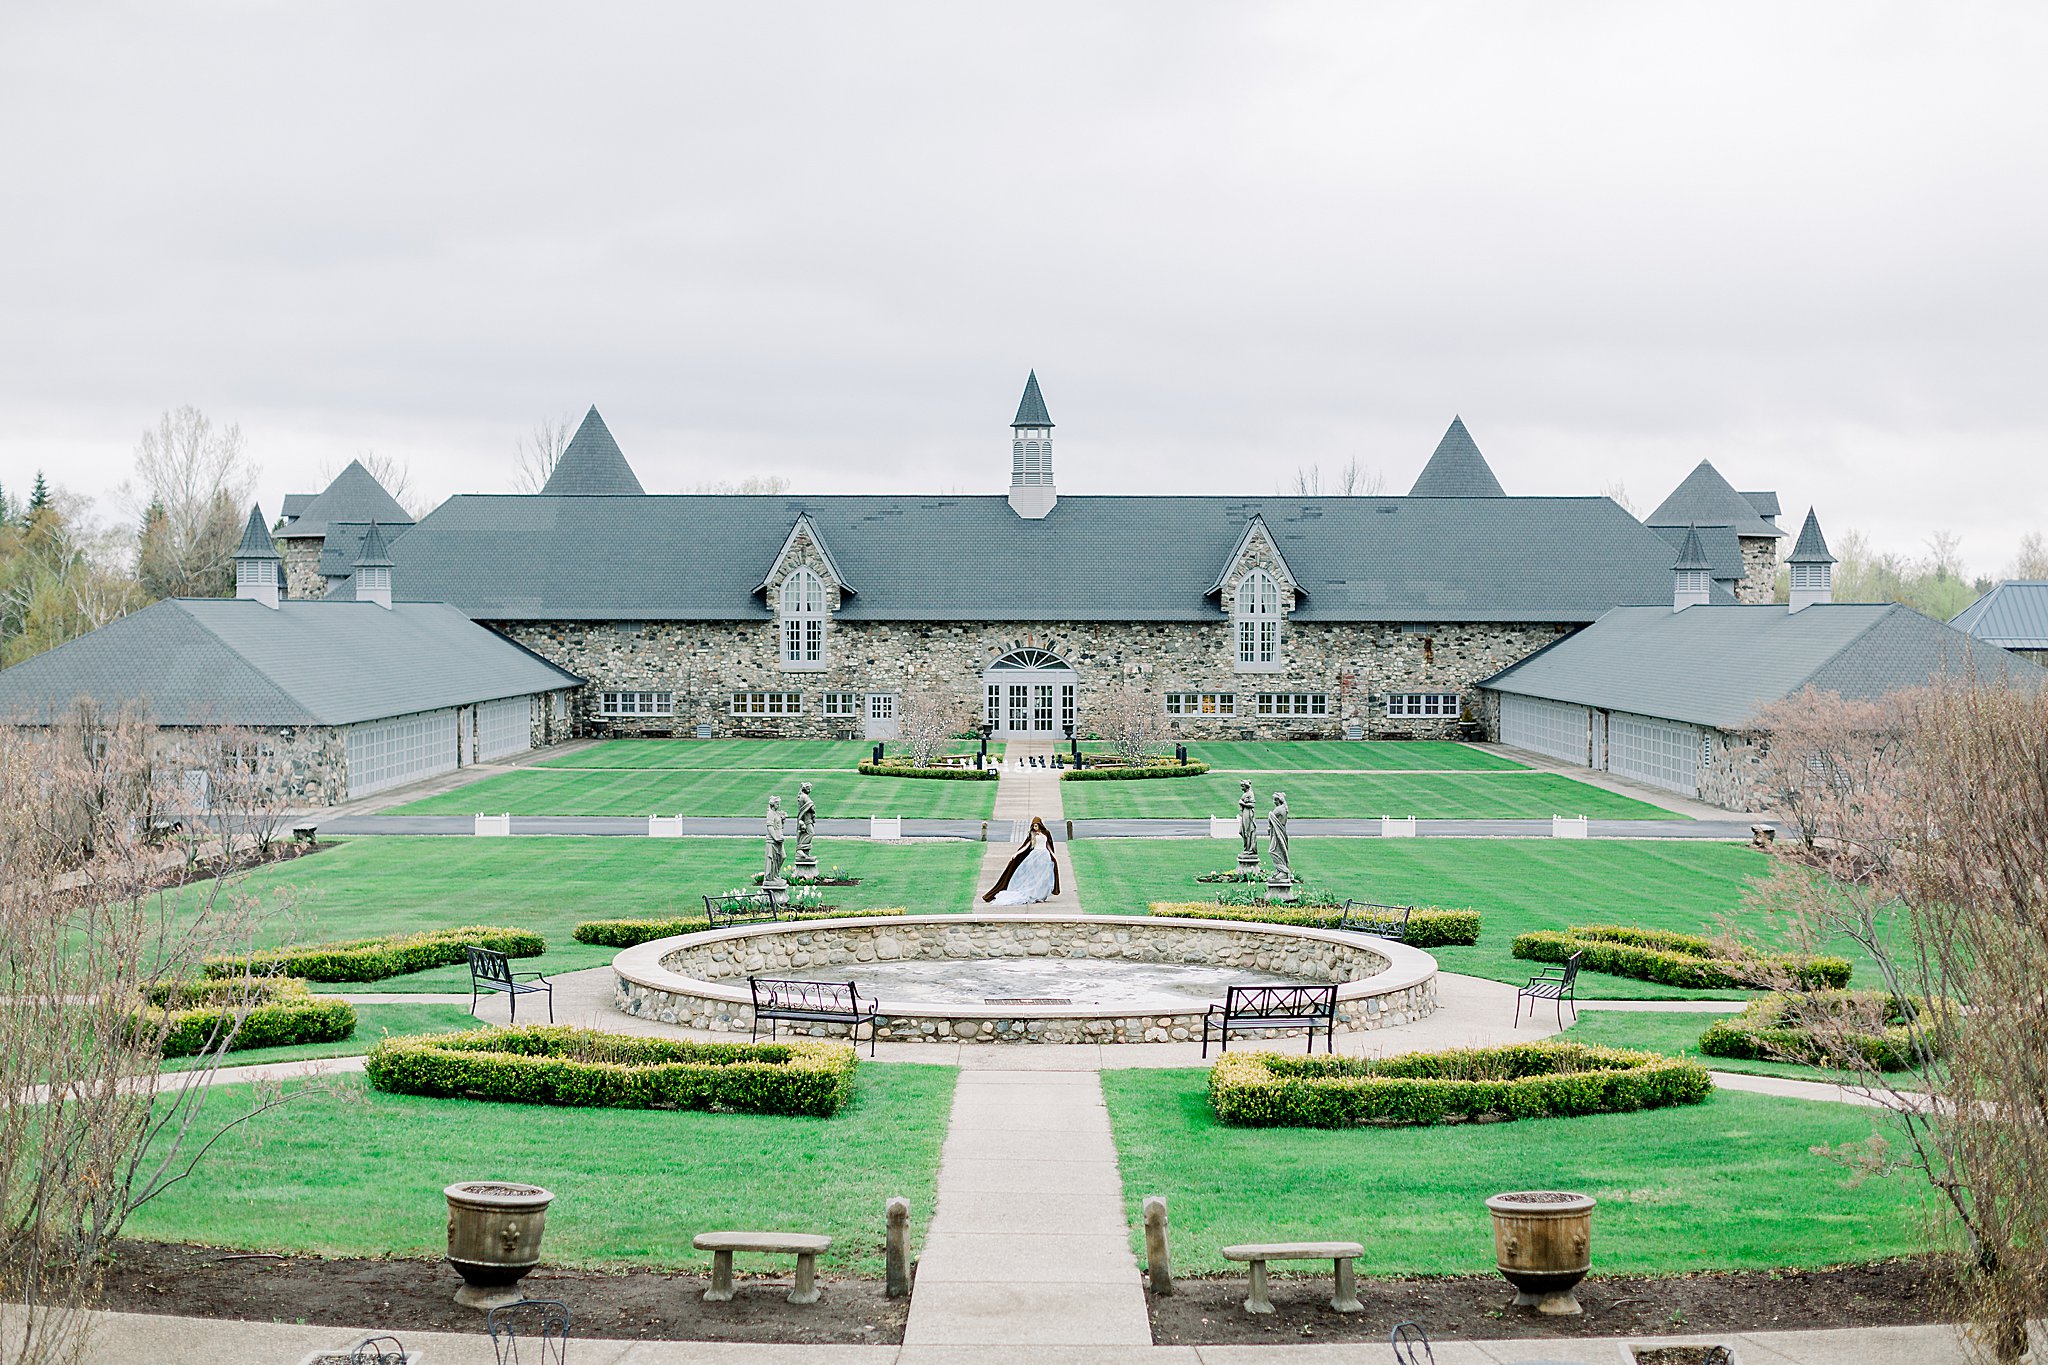 Bride wanders through Castle grounds for Game of Thrones wedding at Castle Farms in Charlevoix, Michigan.